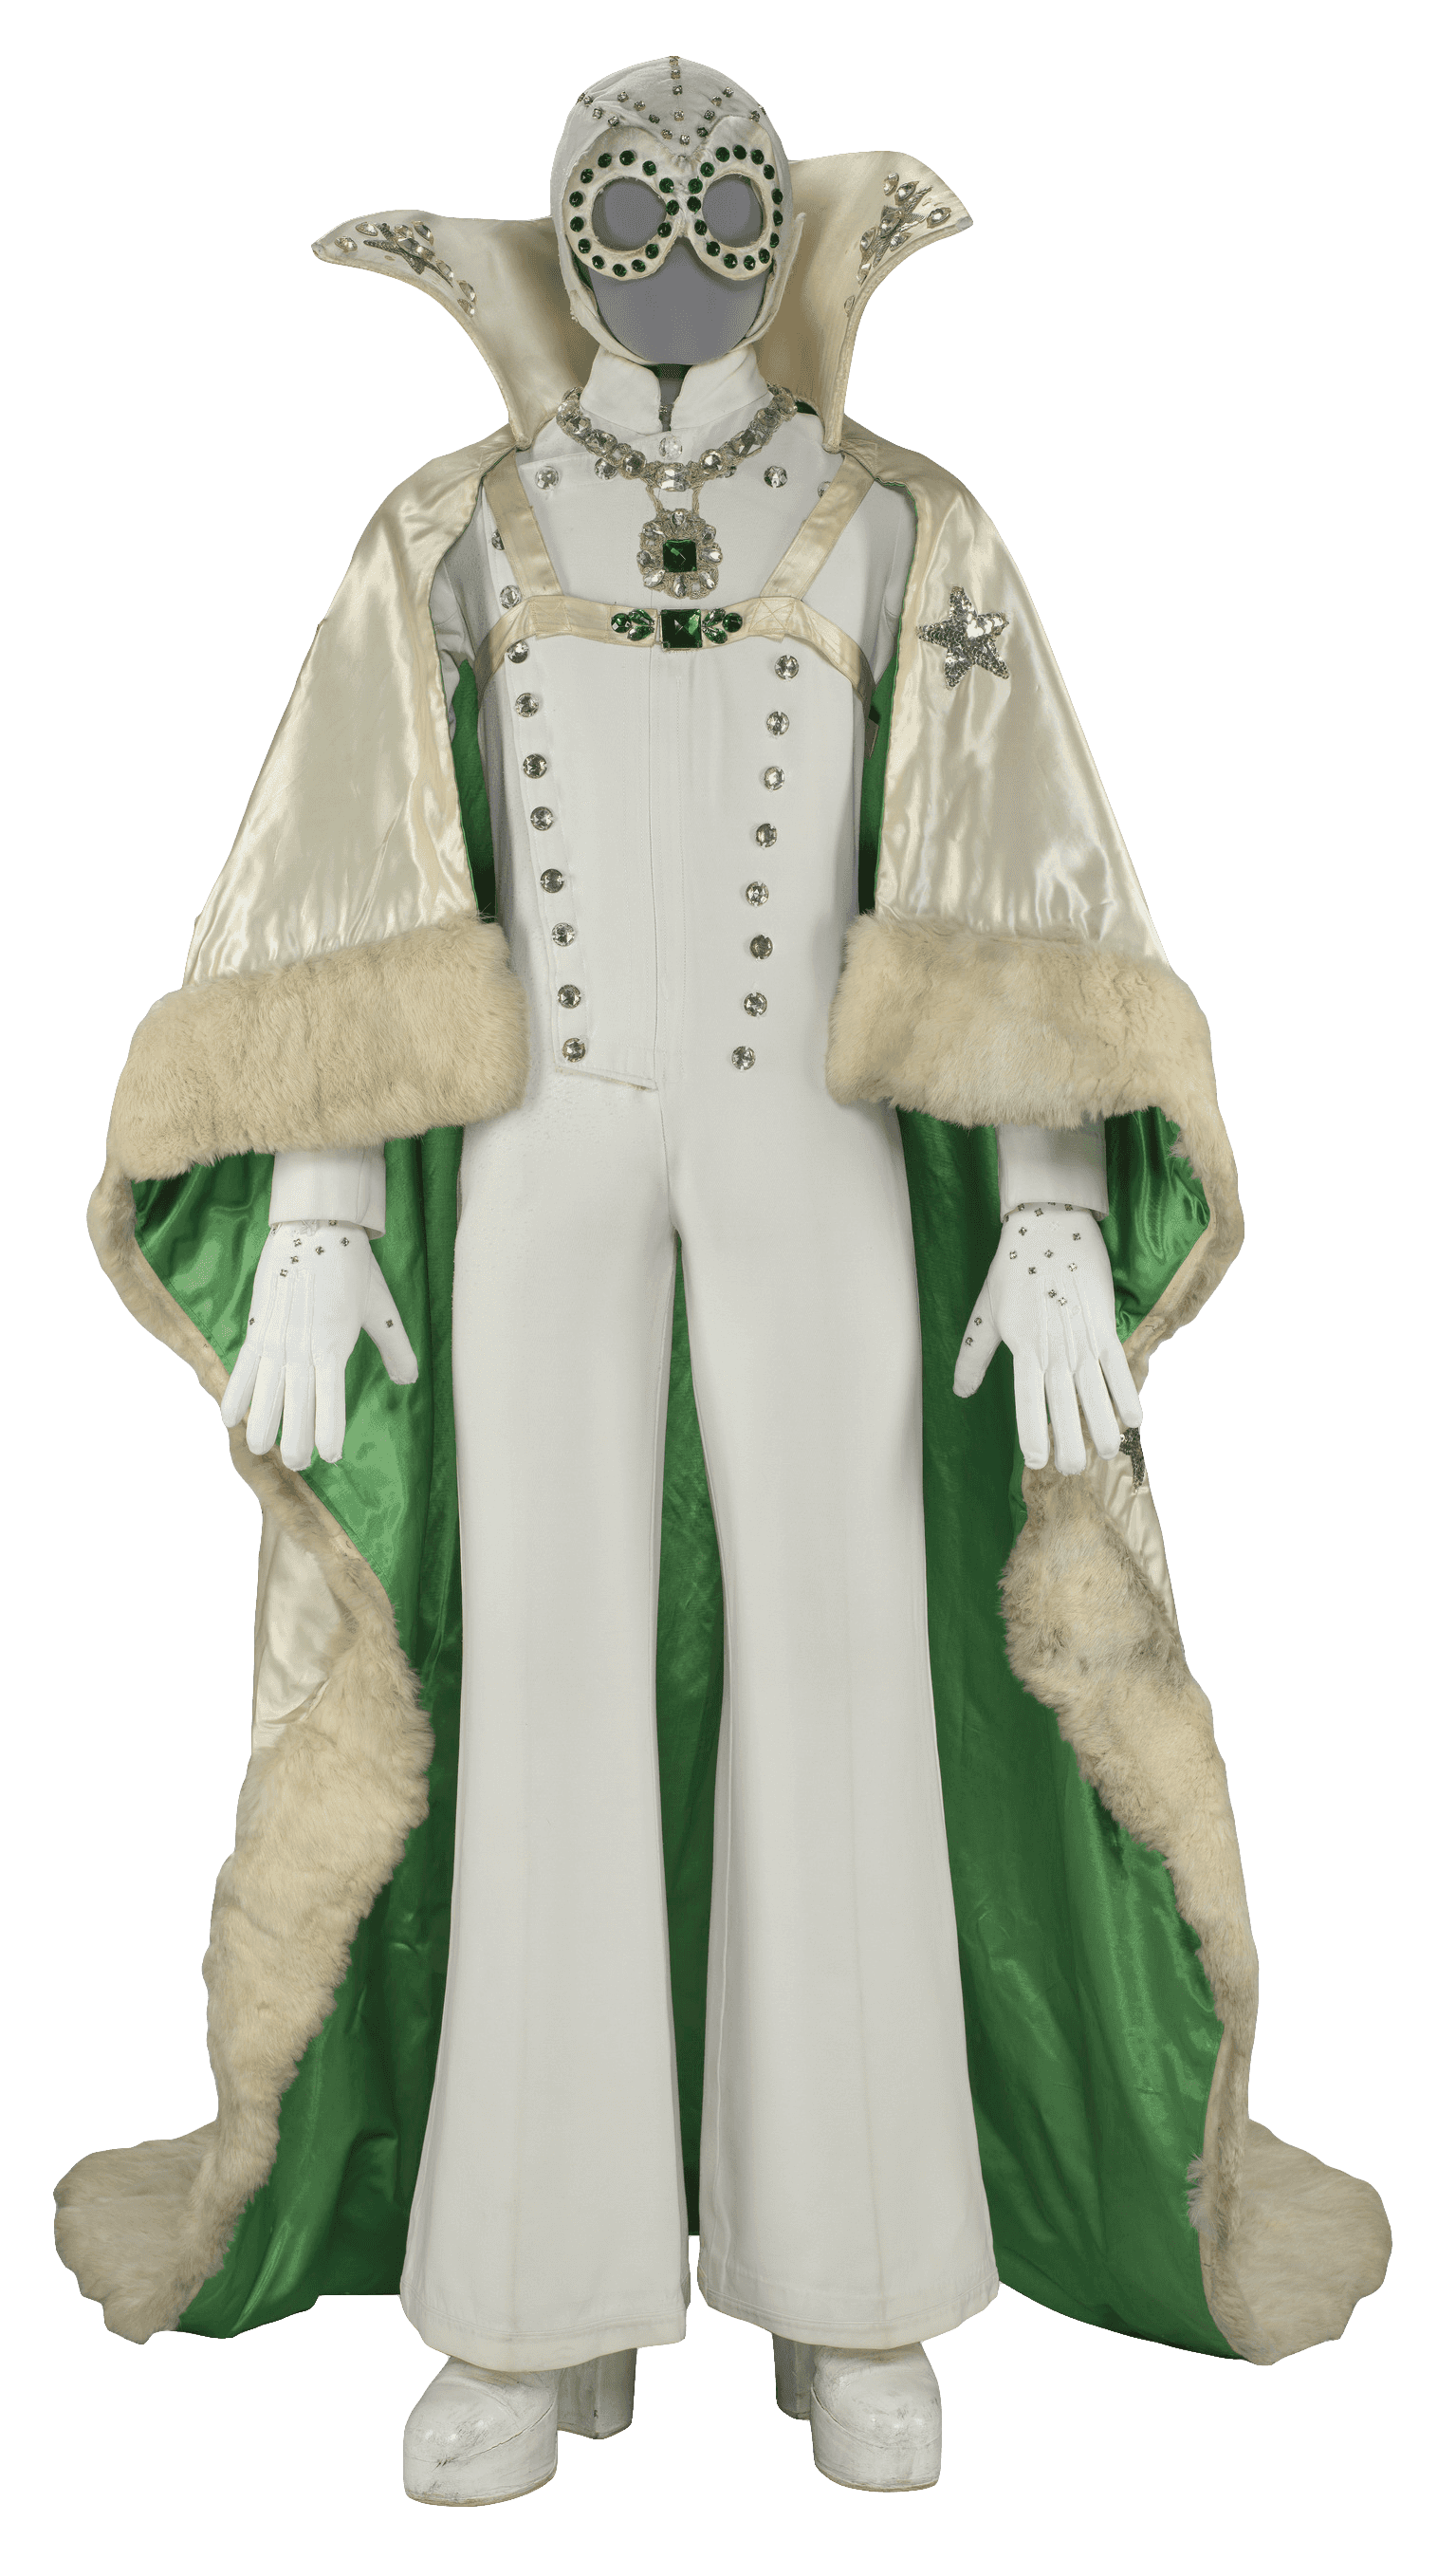 The white coat and jumpsuit with oversized collar. The lining of the jacket is green.